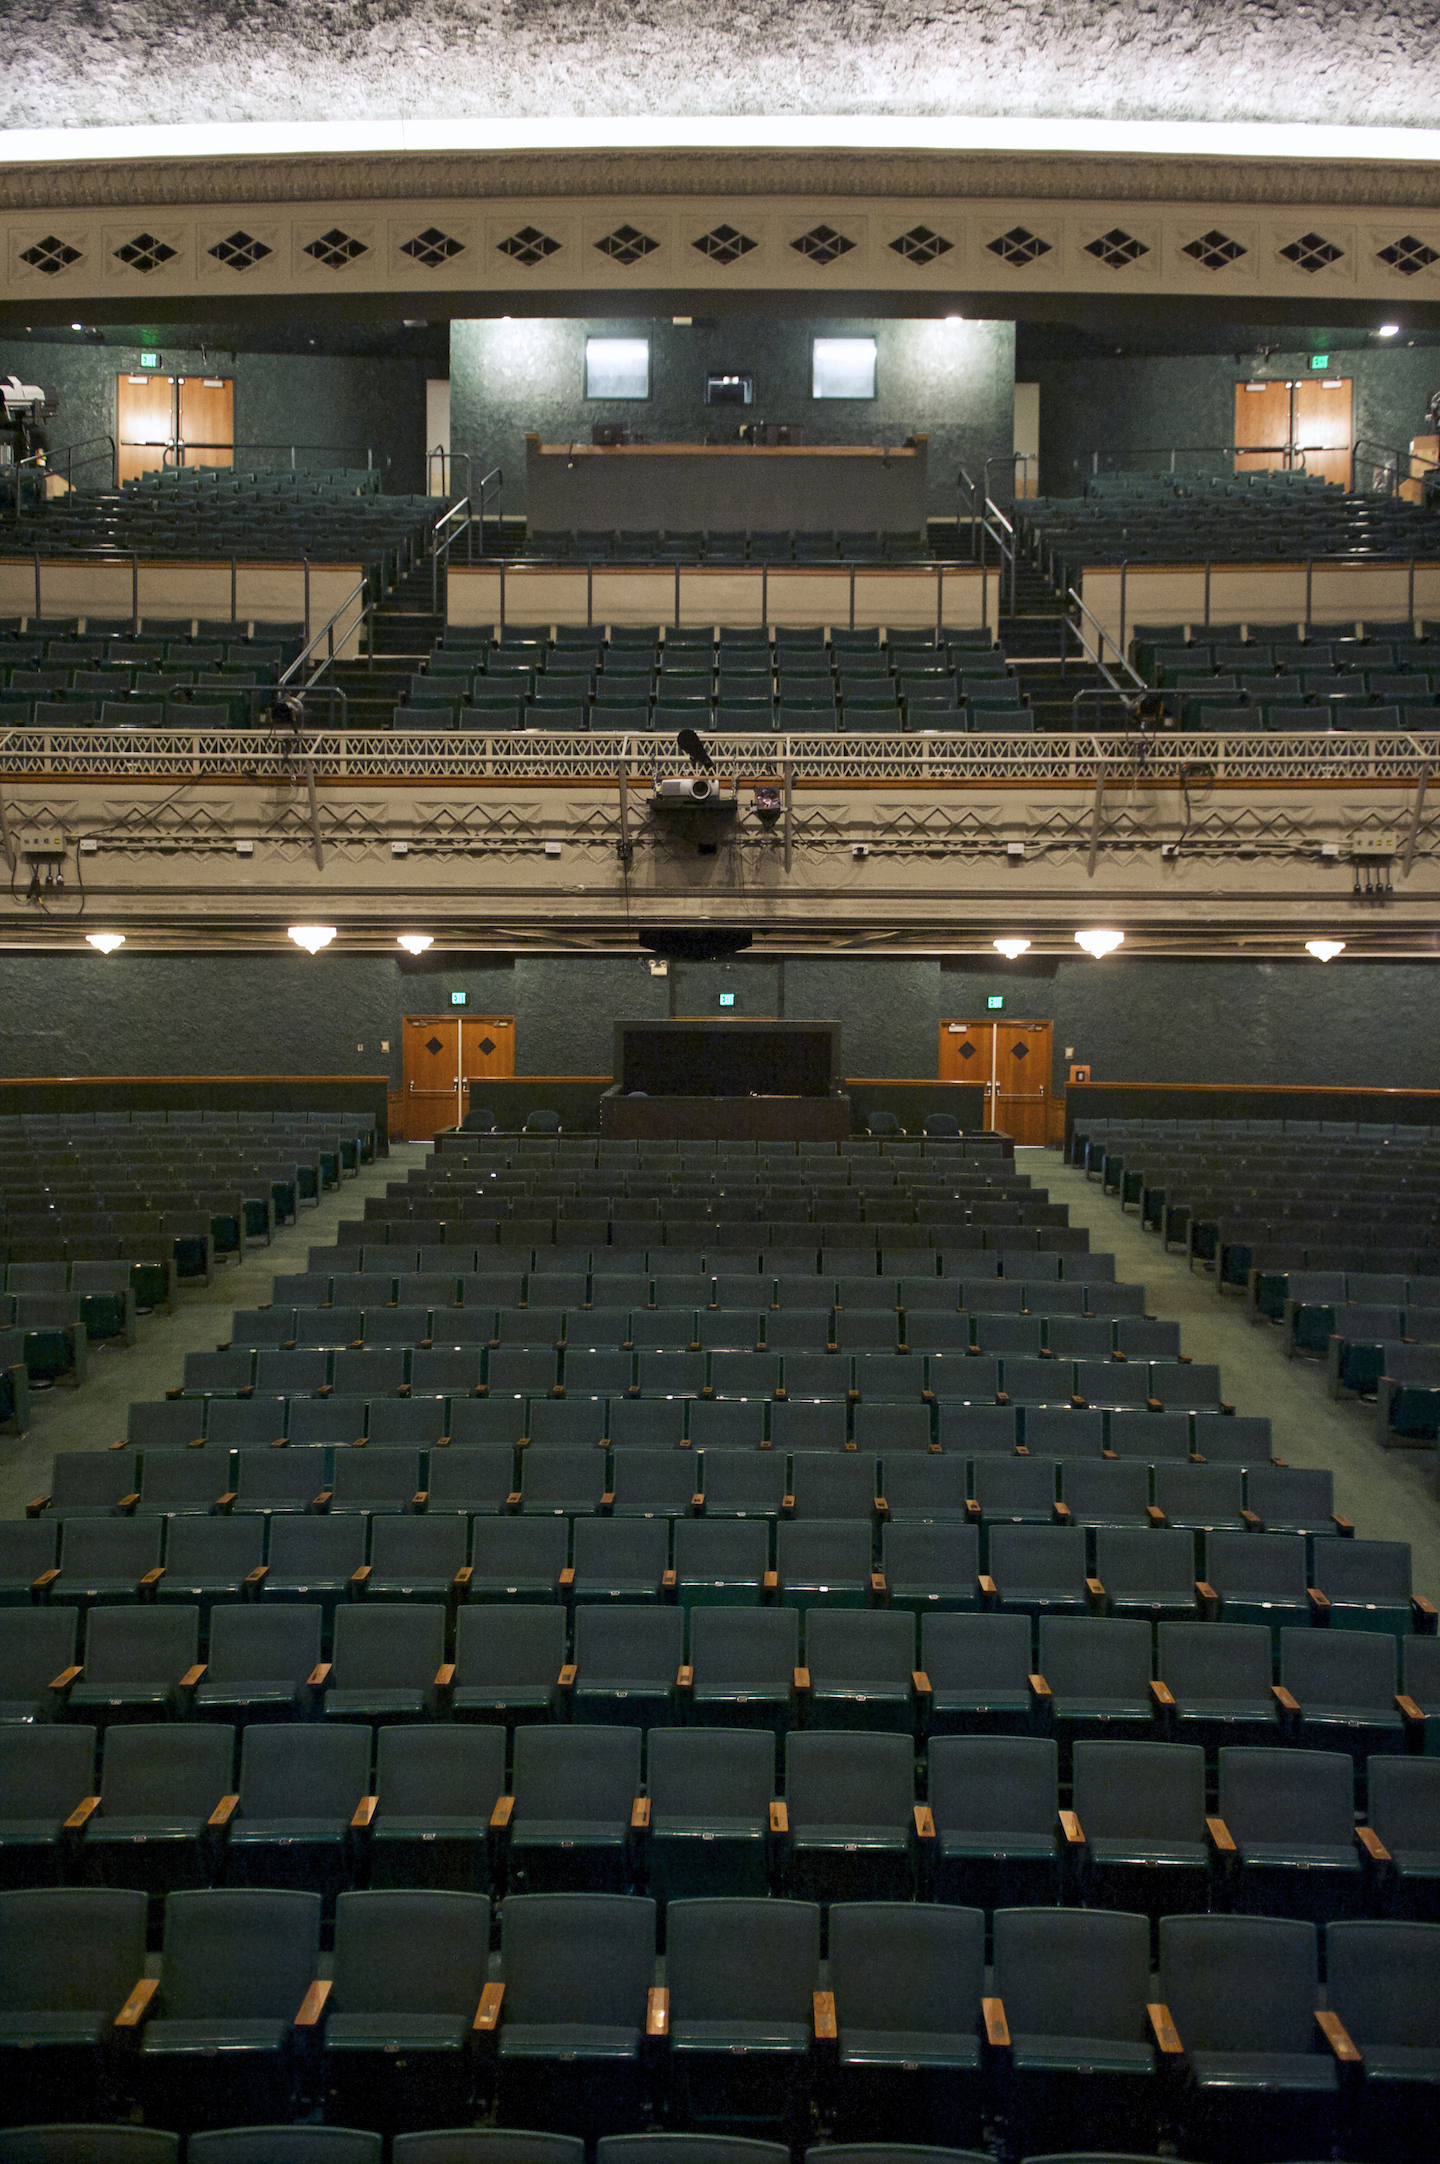 A view from the stage at Salt Lake Community College's Grand Theatre, Sundance Institute's newest screening venue for the annual Sundance Film Festival.